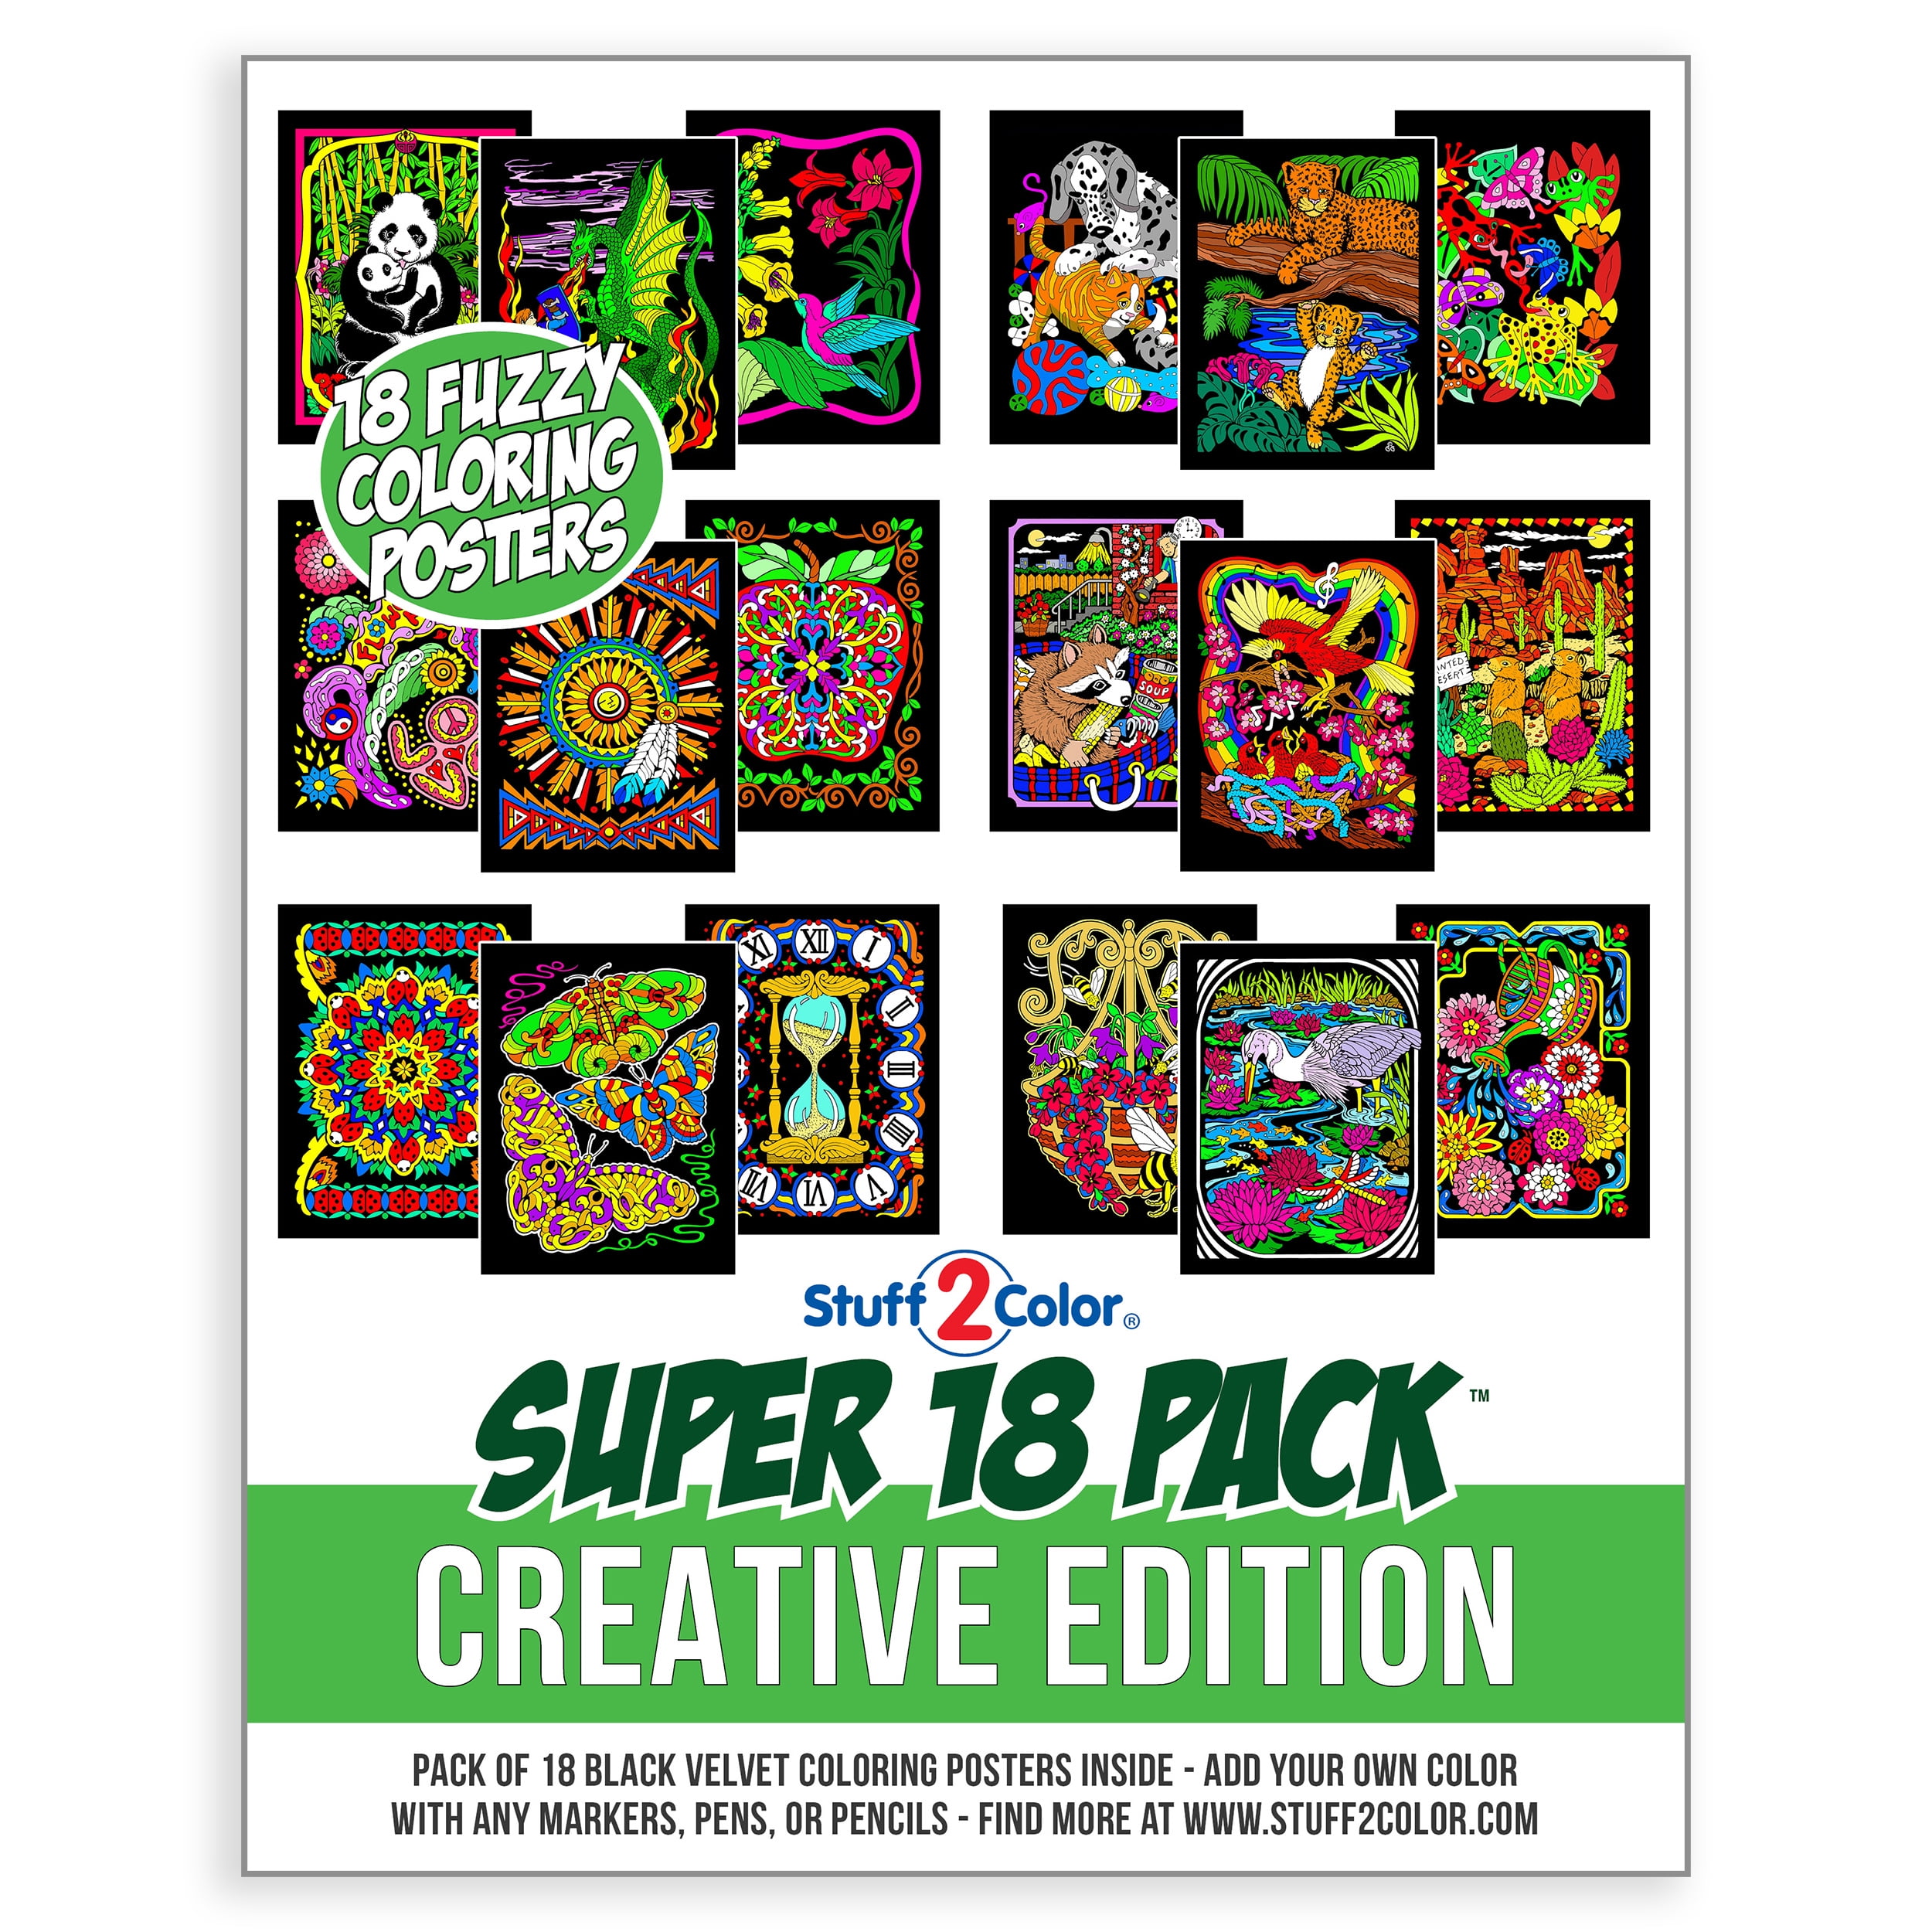 Super Pack of 18 Fuzzy Velvet Coloring Posters (Creative Edition